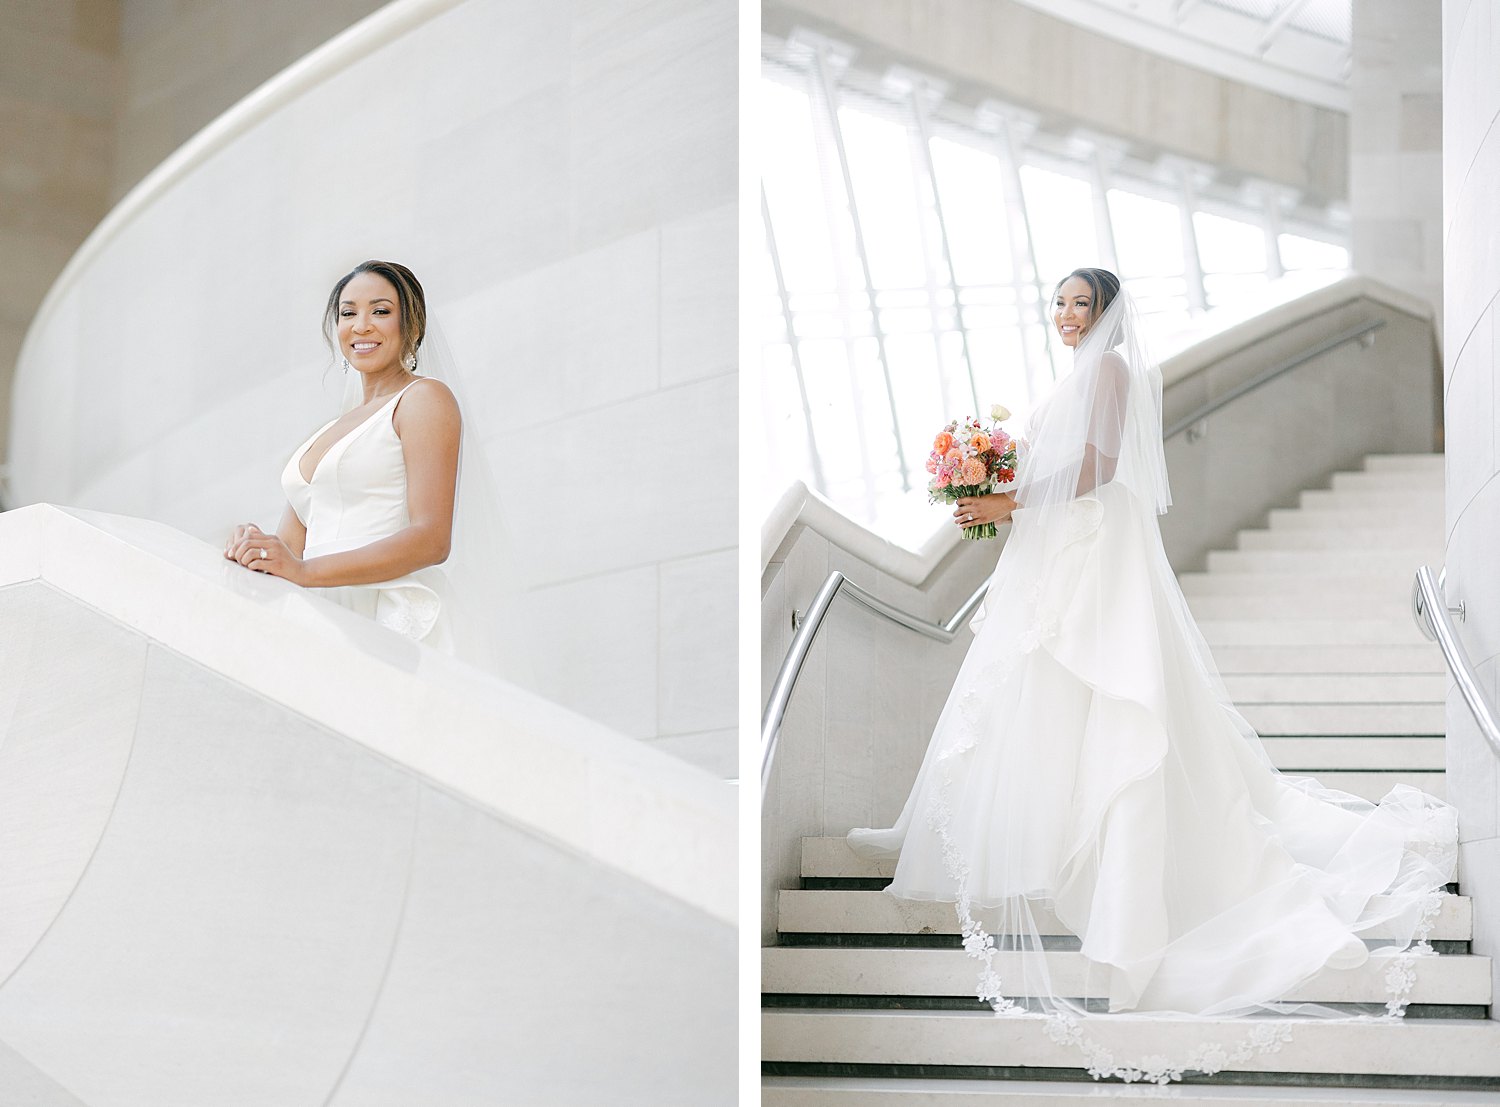 Bride in white wedding dress holding bouquet and standing on stair case